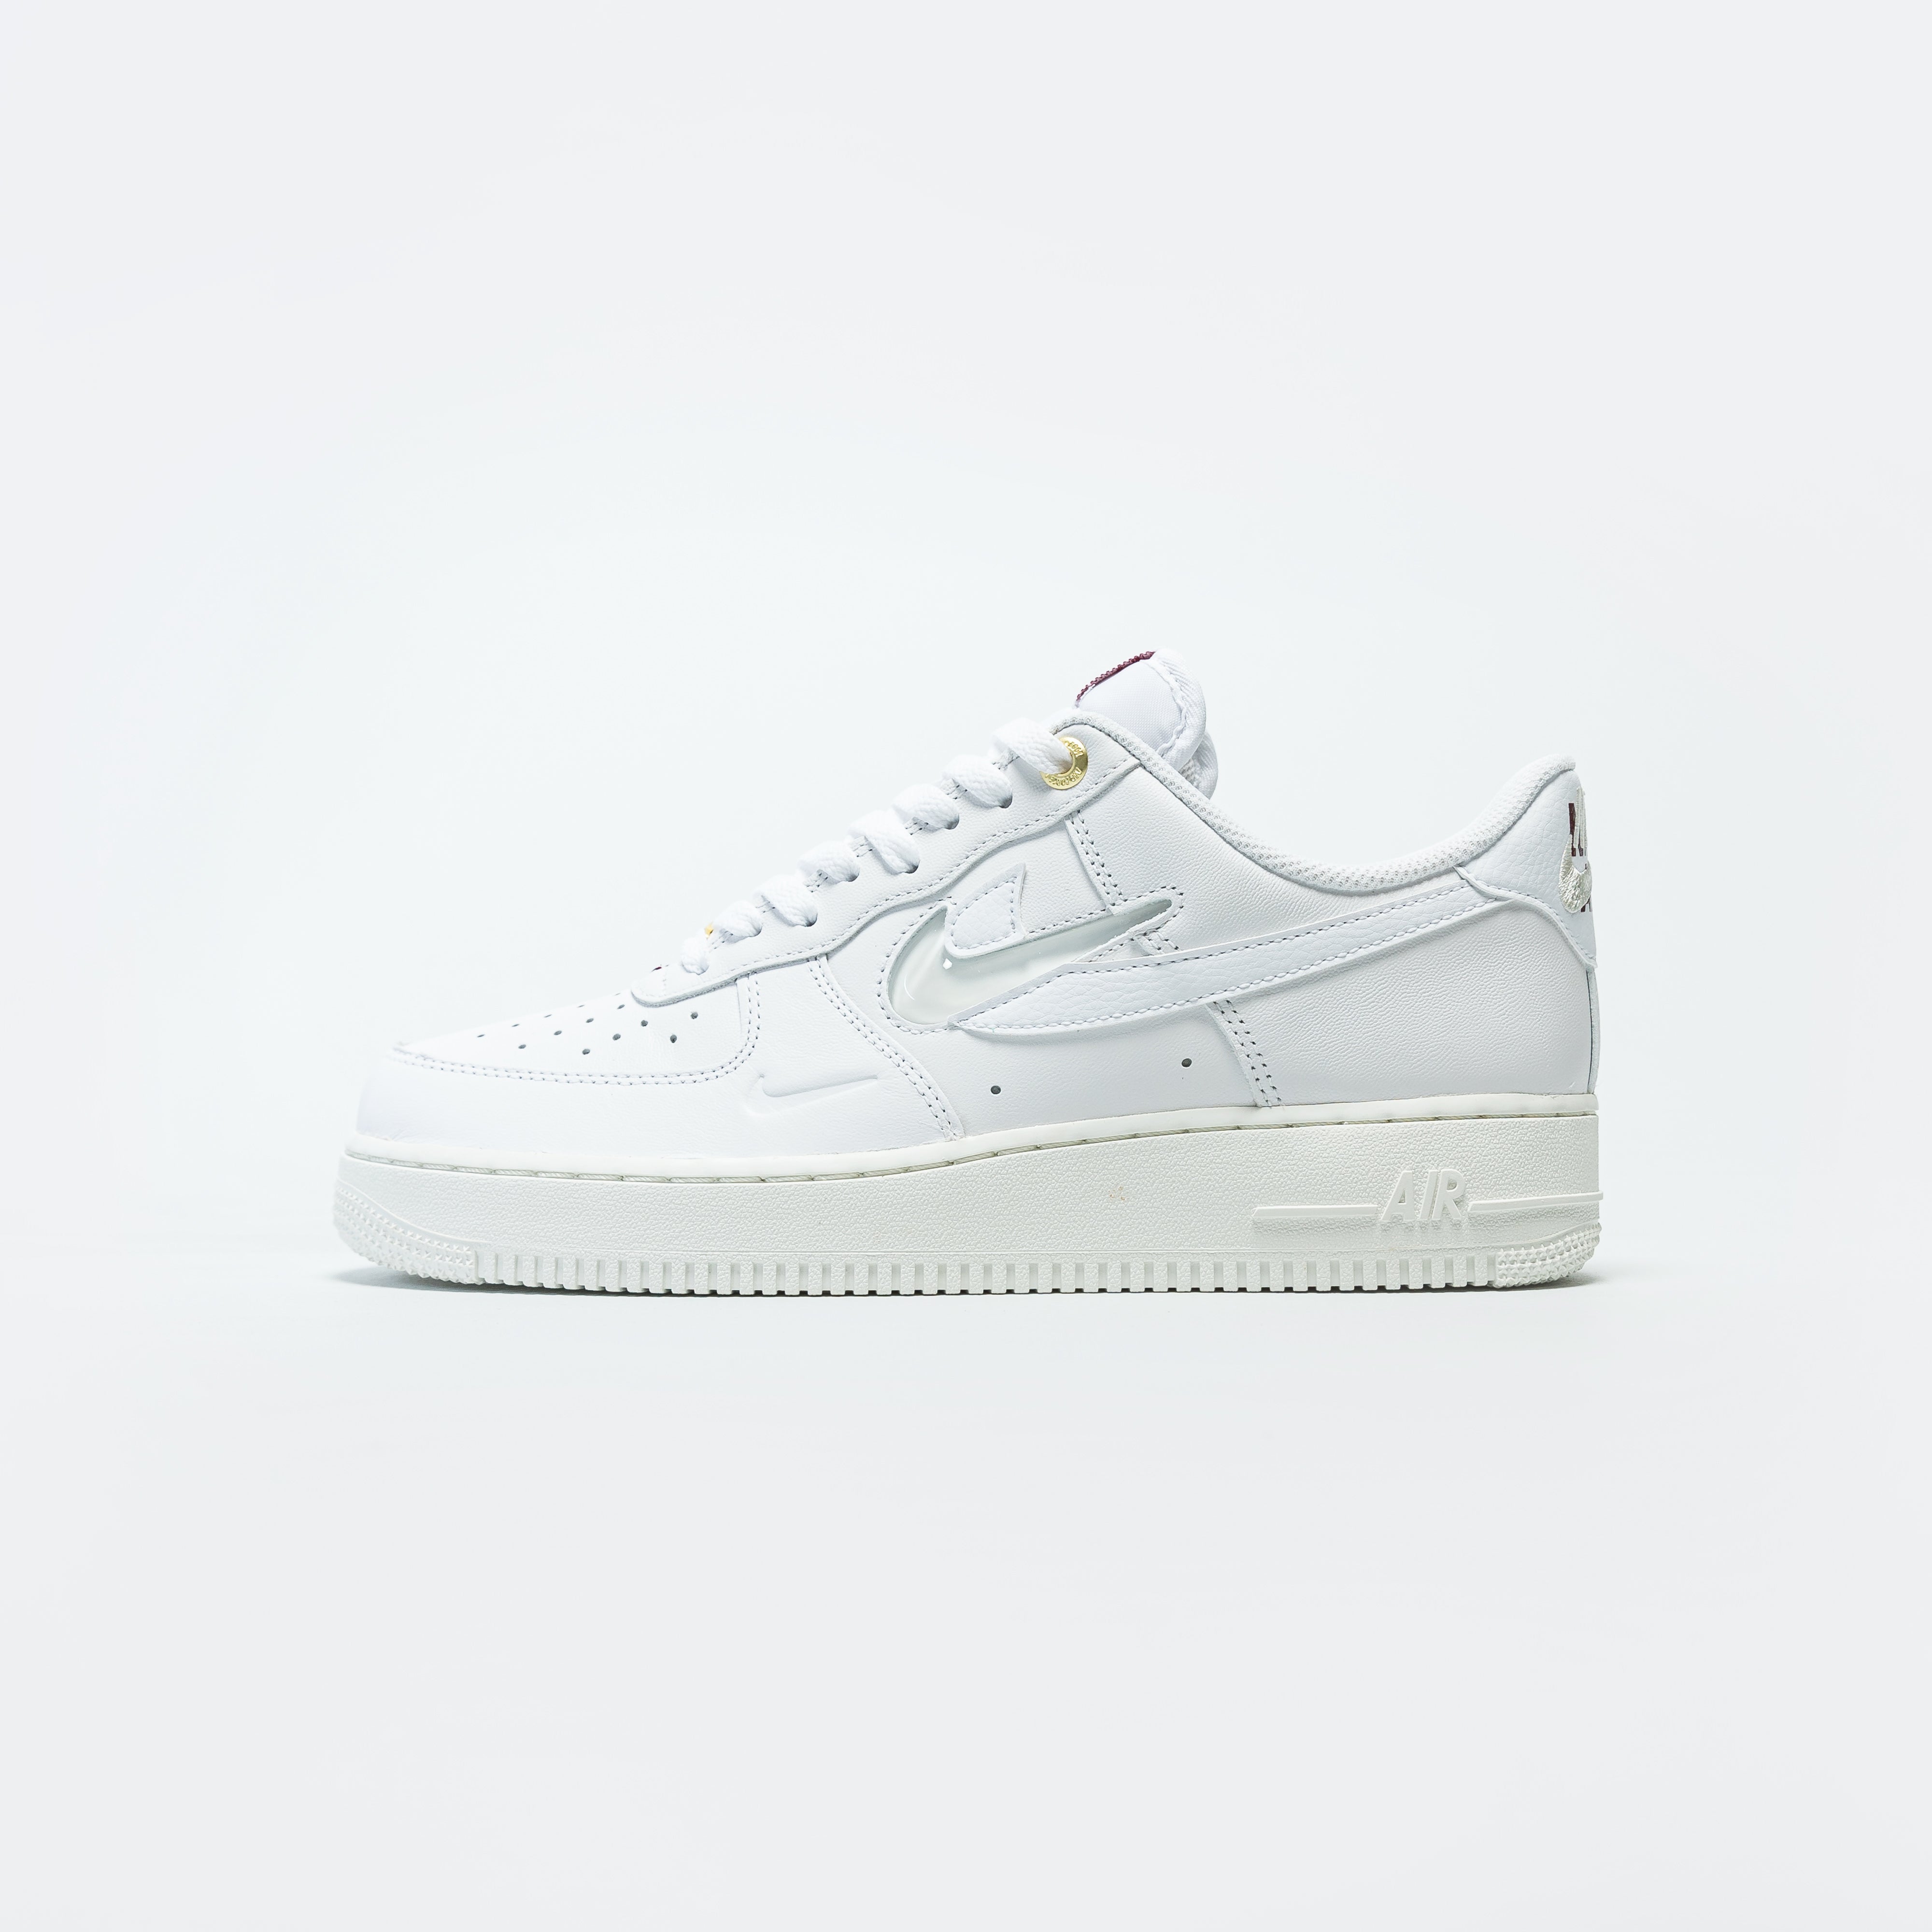 Cerveza inglesa Colector tarifa Nike Air Force 1 '07 PRM - White/Sail/Team Red | Up There Store